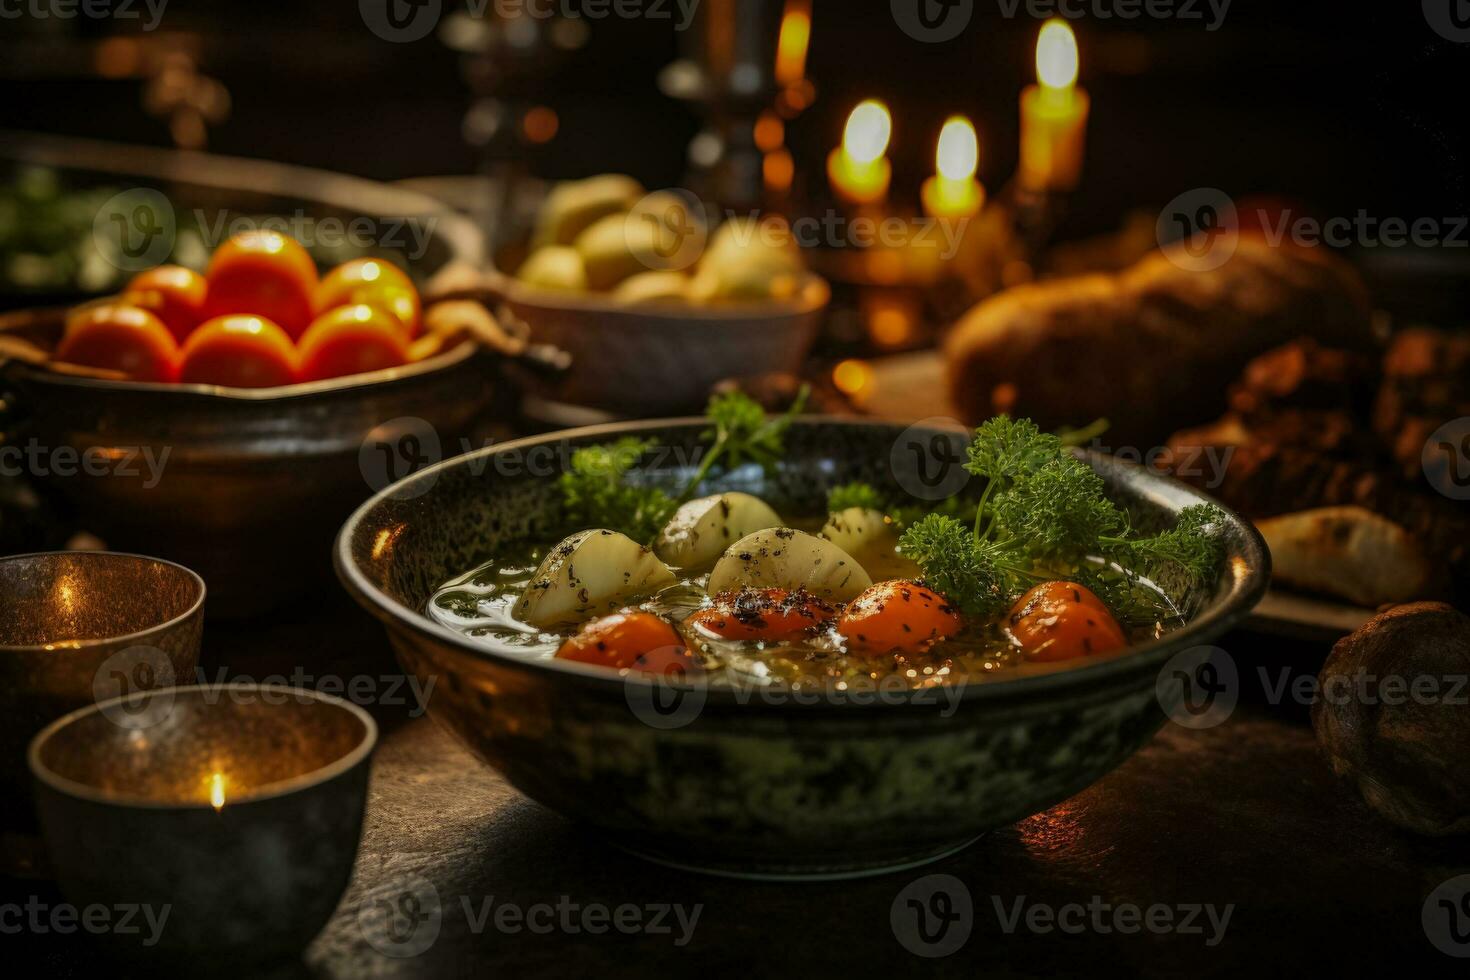 Hearty soup in rustic bowl amid flickering candles embodying hygge comfort photo